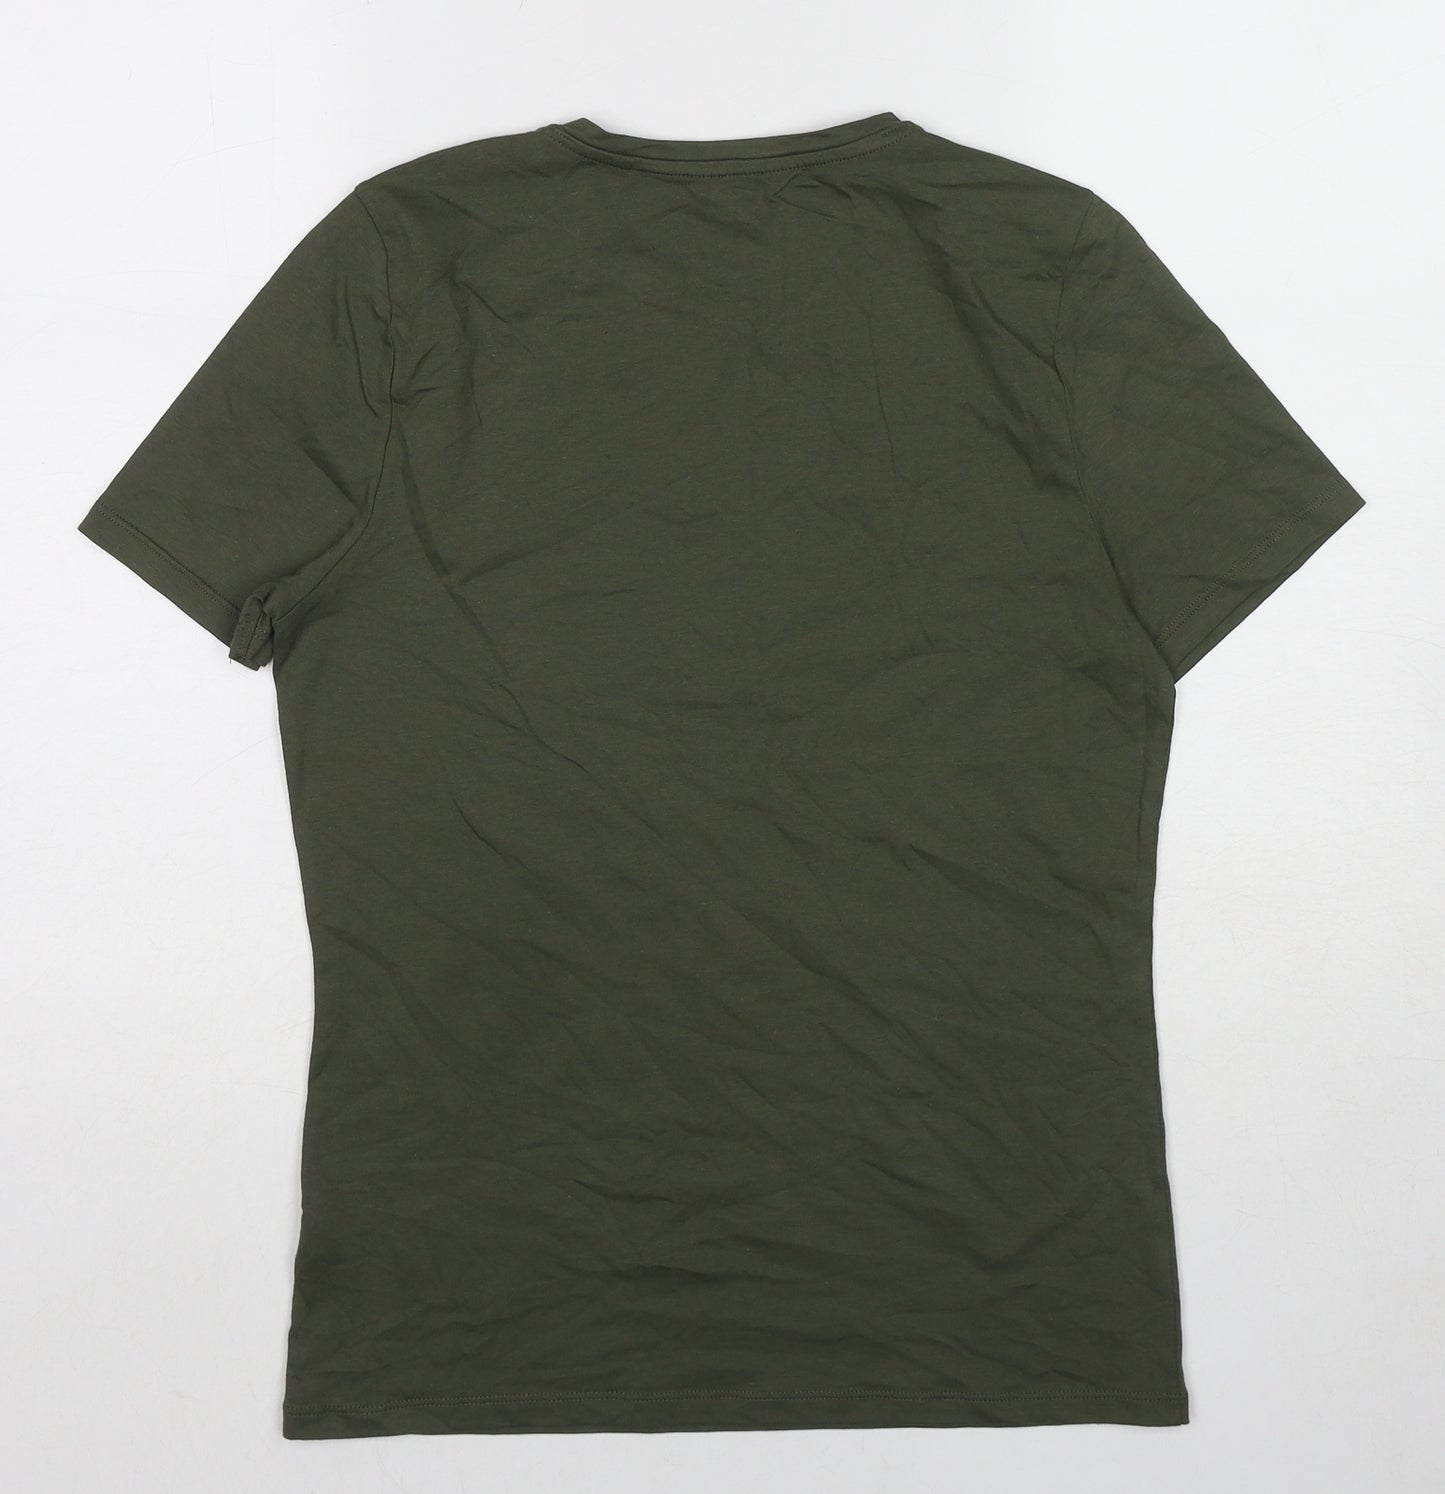 Marks and Spencer Womens Green Cotton Basic T-Shirt Size 10 Crew Neck